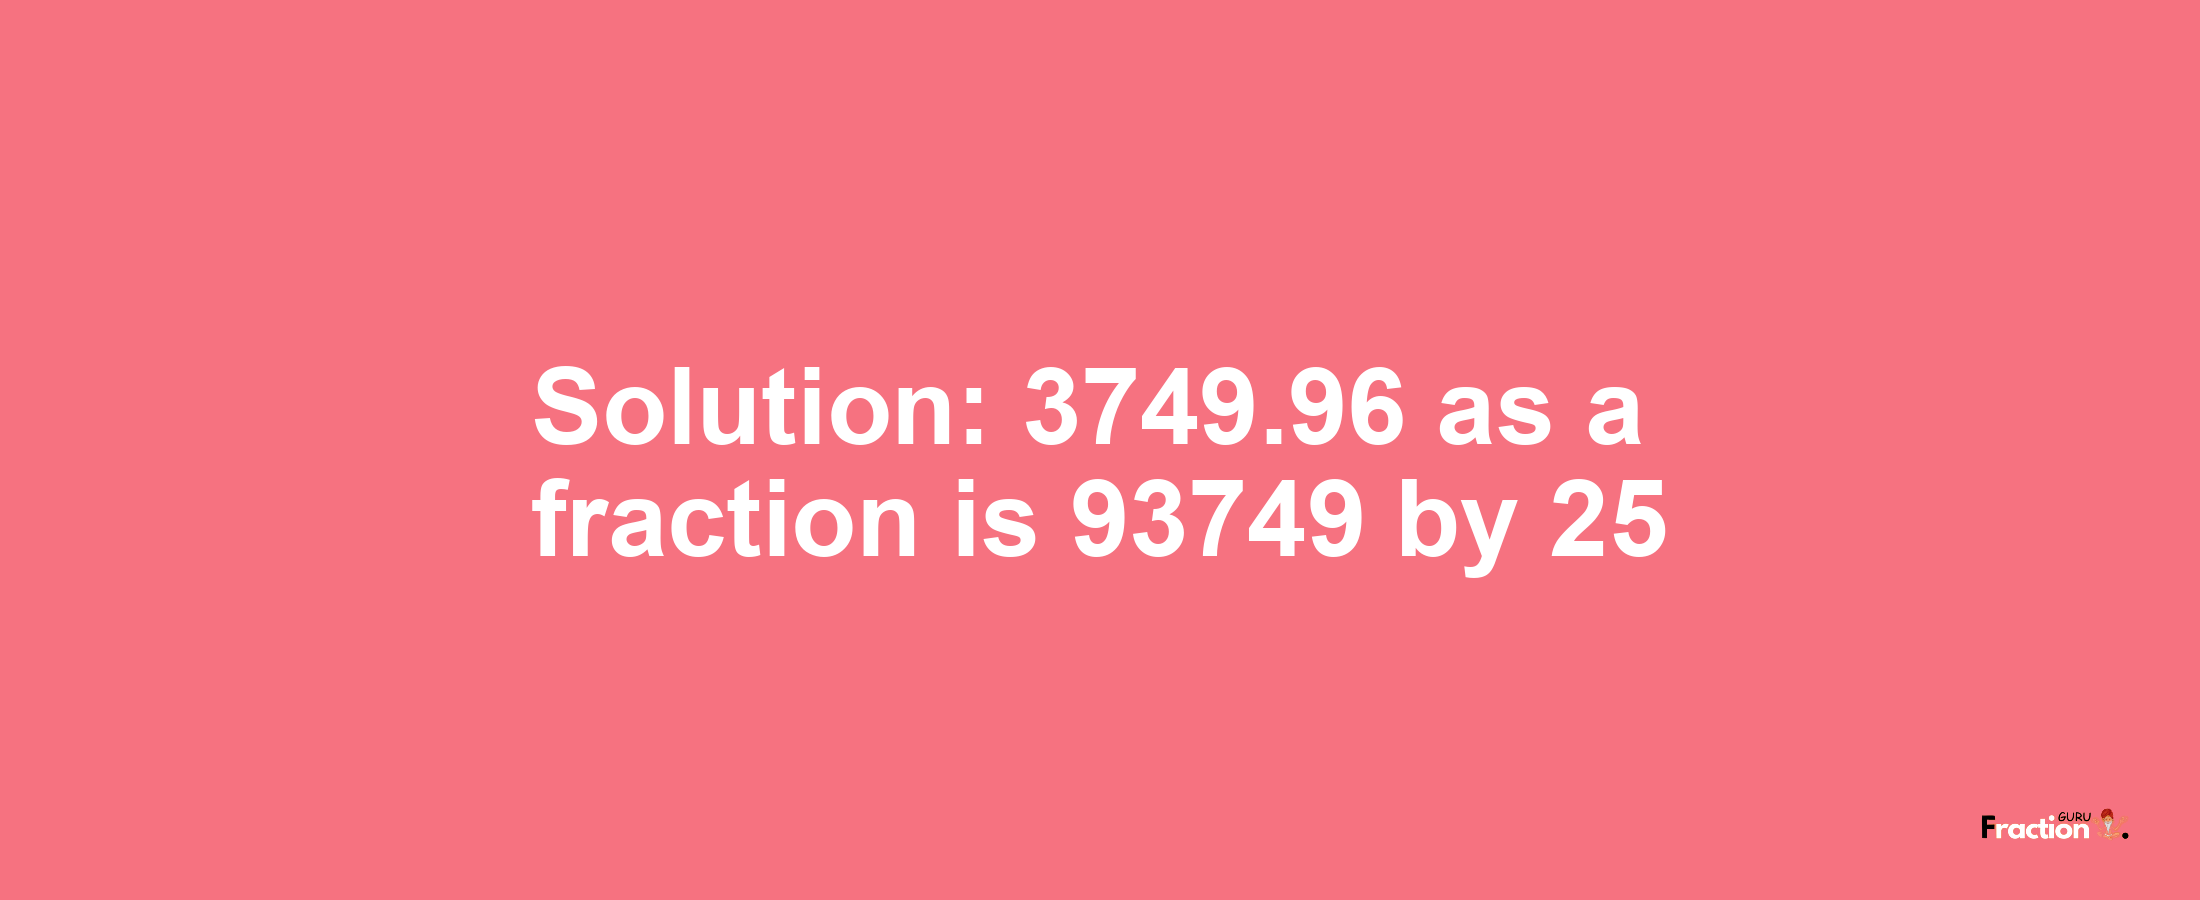 Solution:3749.96 as a fraction is 93749/25